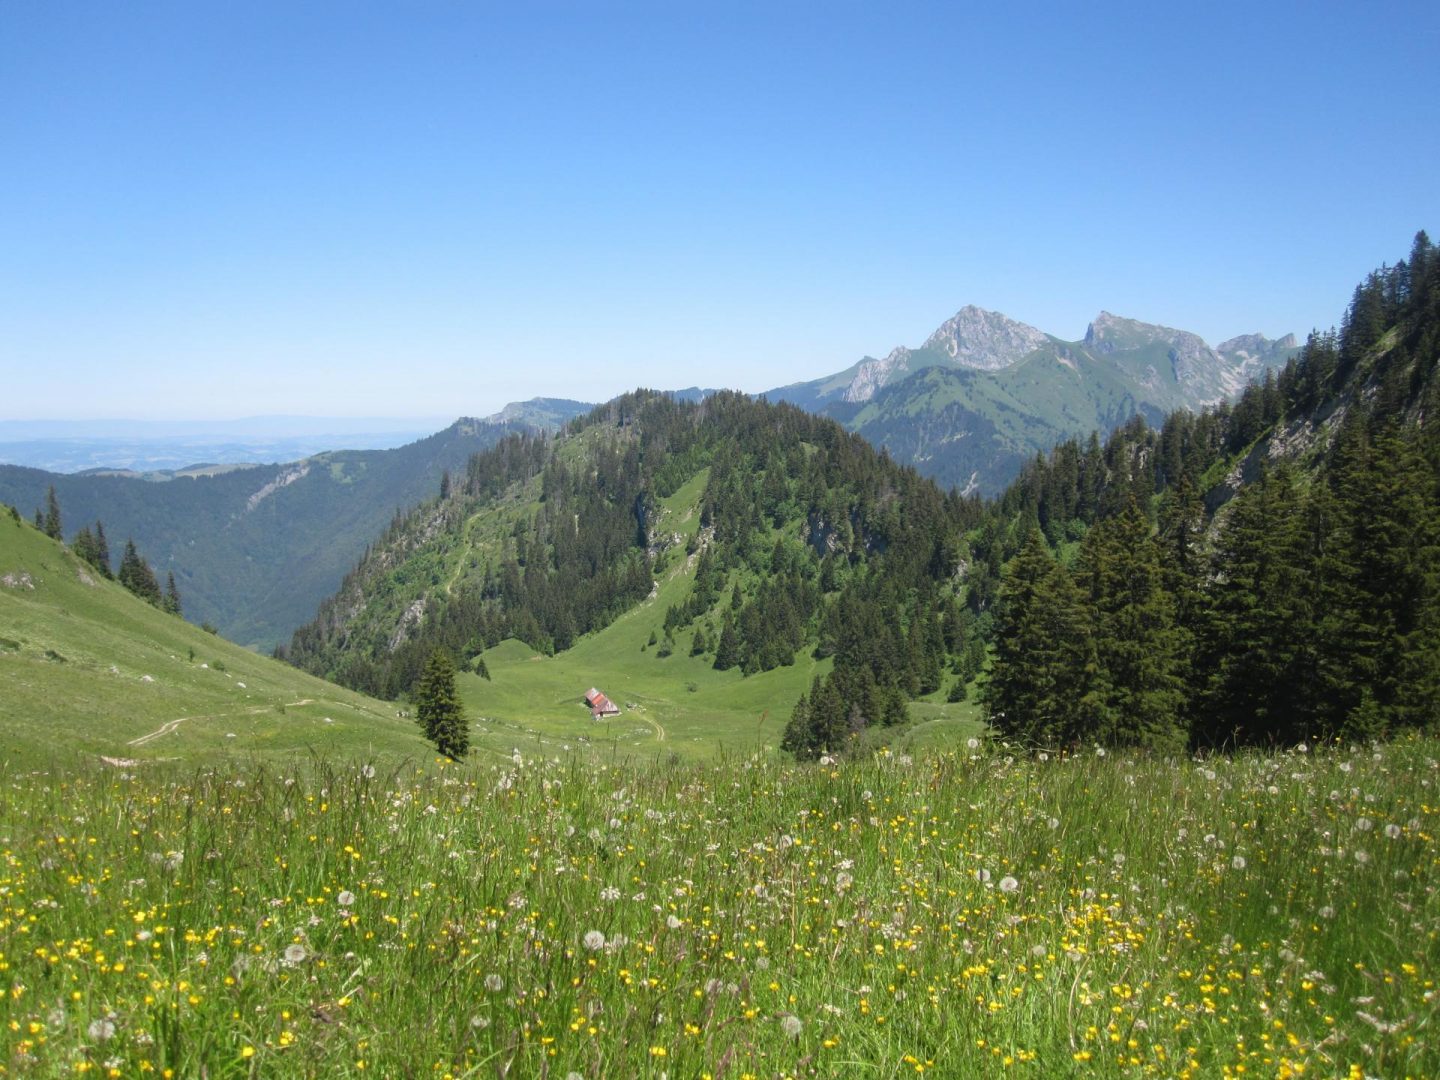 Win a summer chalet adventure in the French Alps with AliKats Mountain Holidays